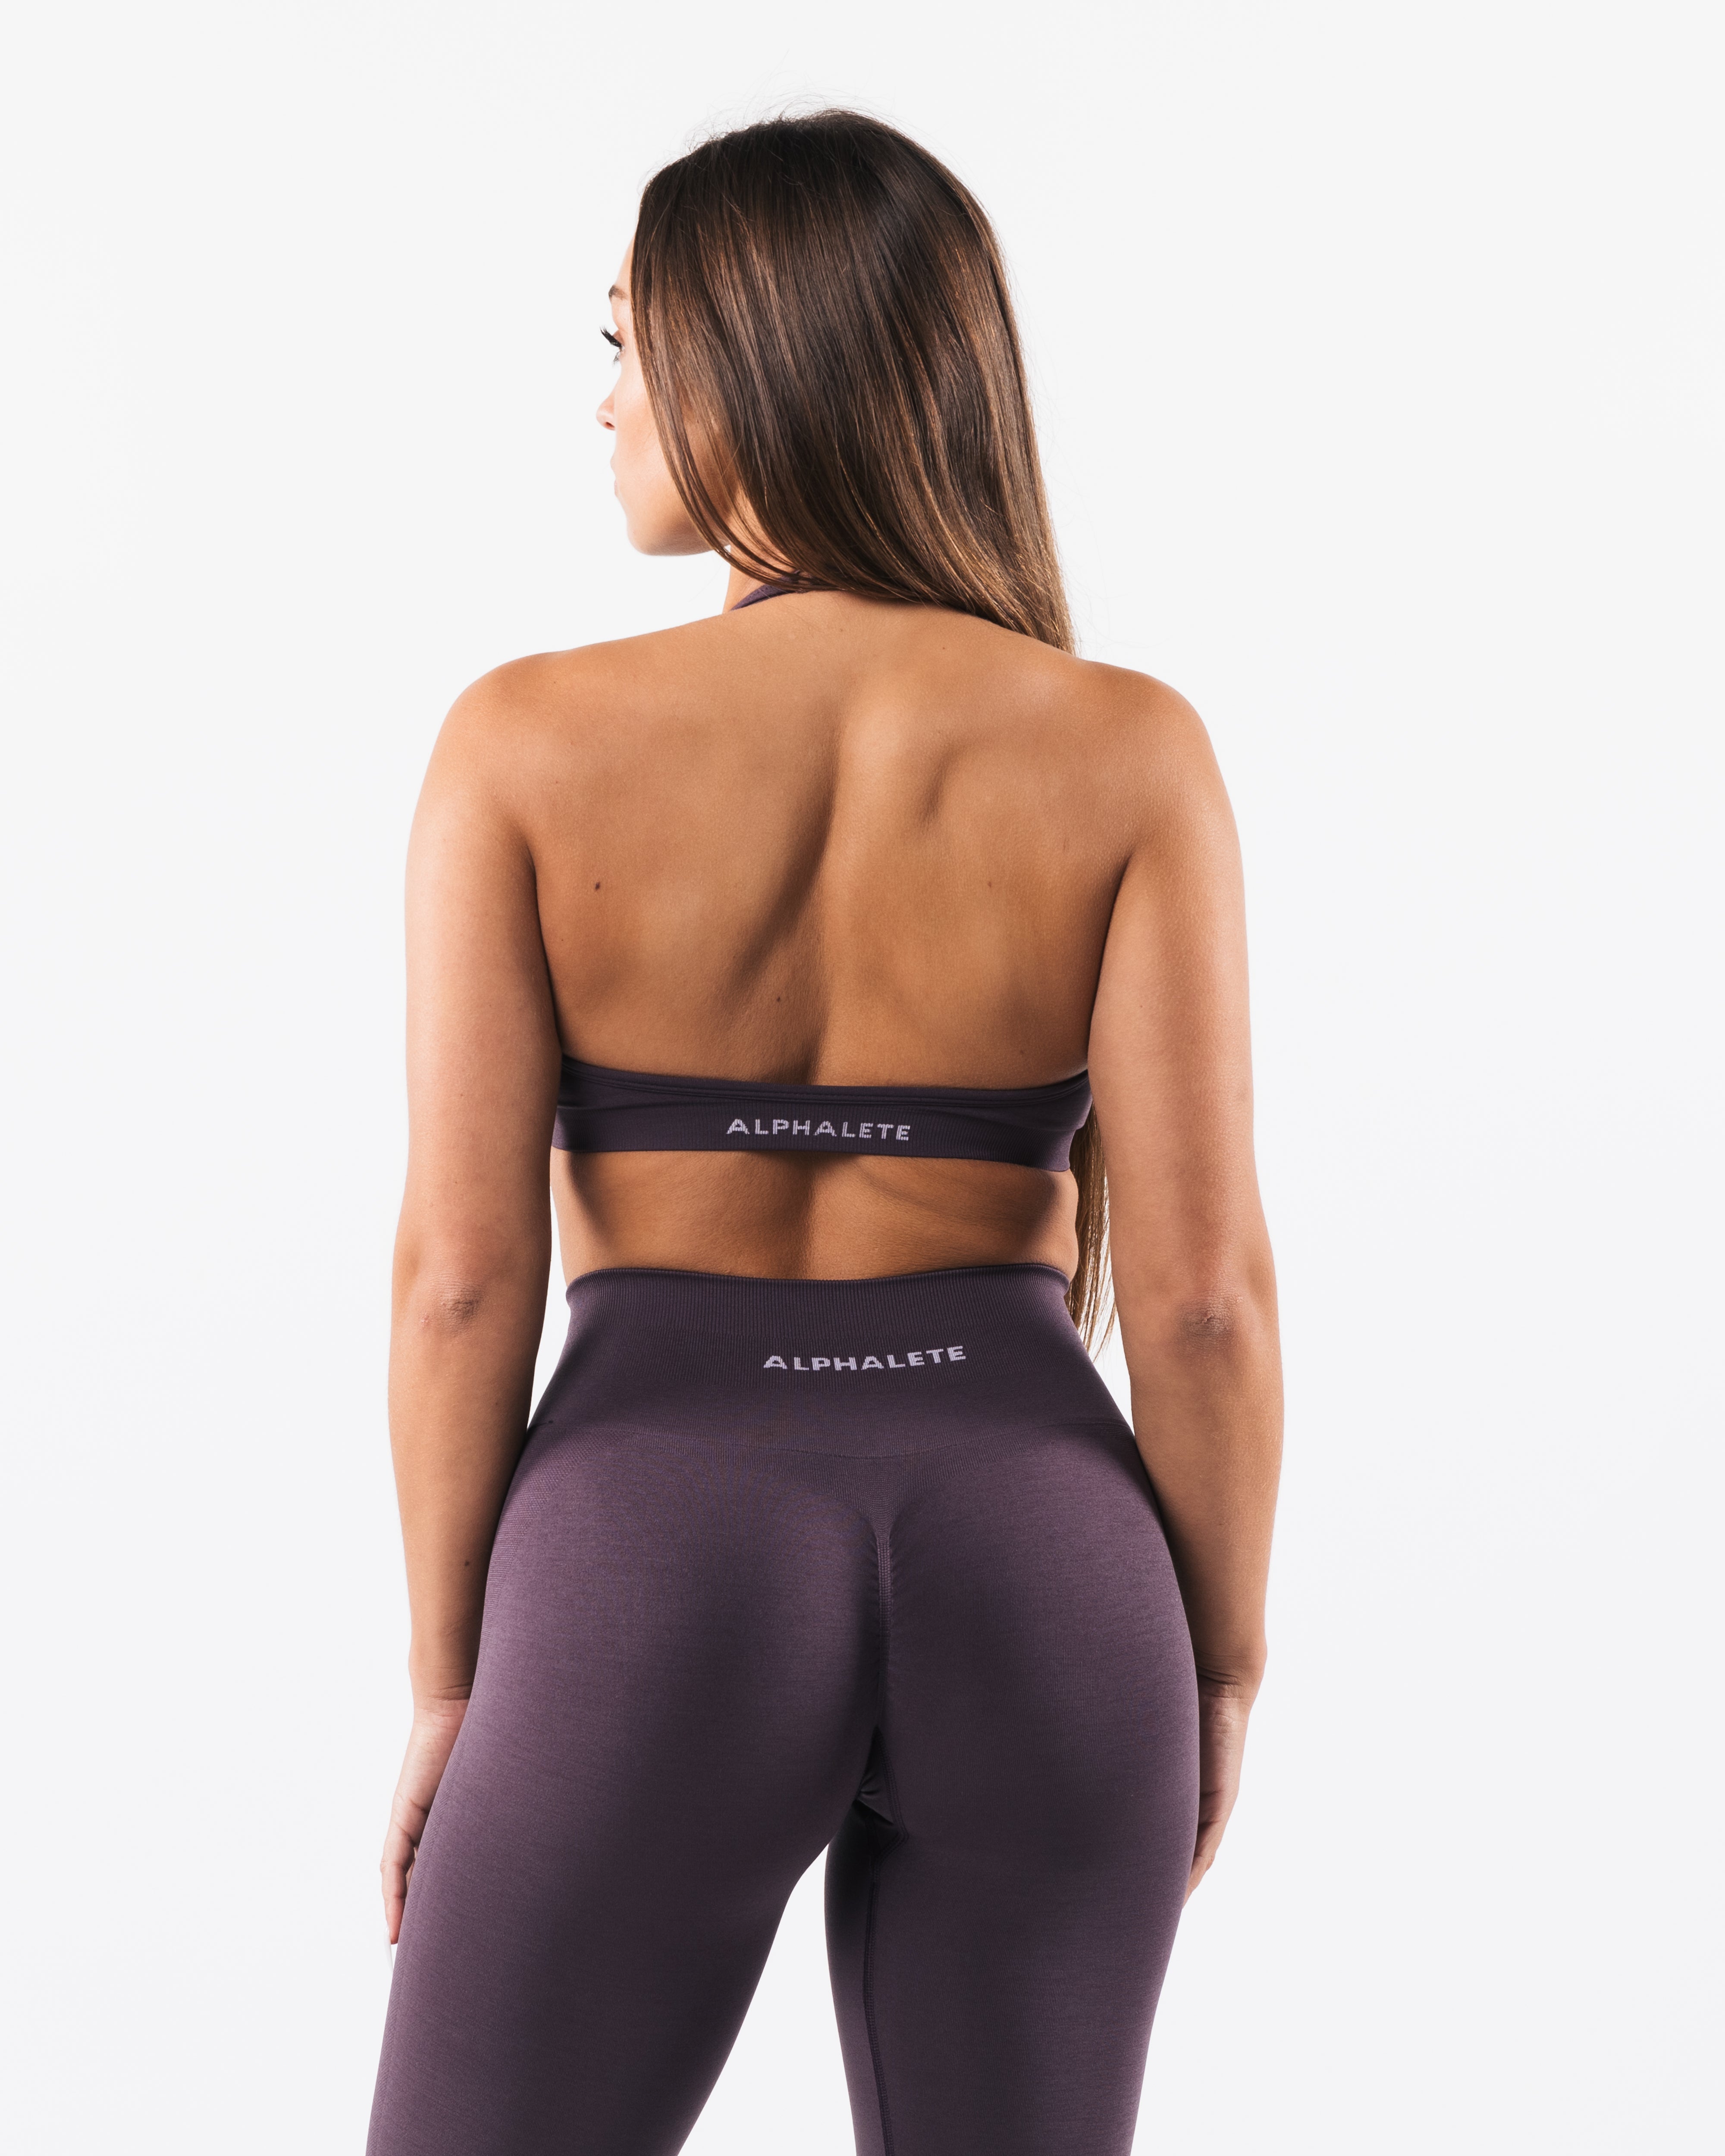 ALPHALETE AMPLIFY DUPES ROUND 2  new collection, different waistband,  popular sports bra dupe 